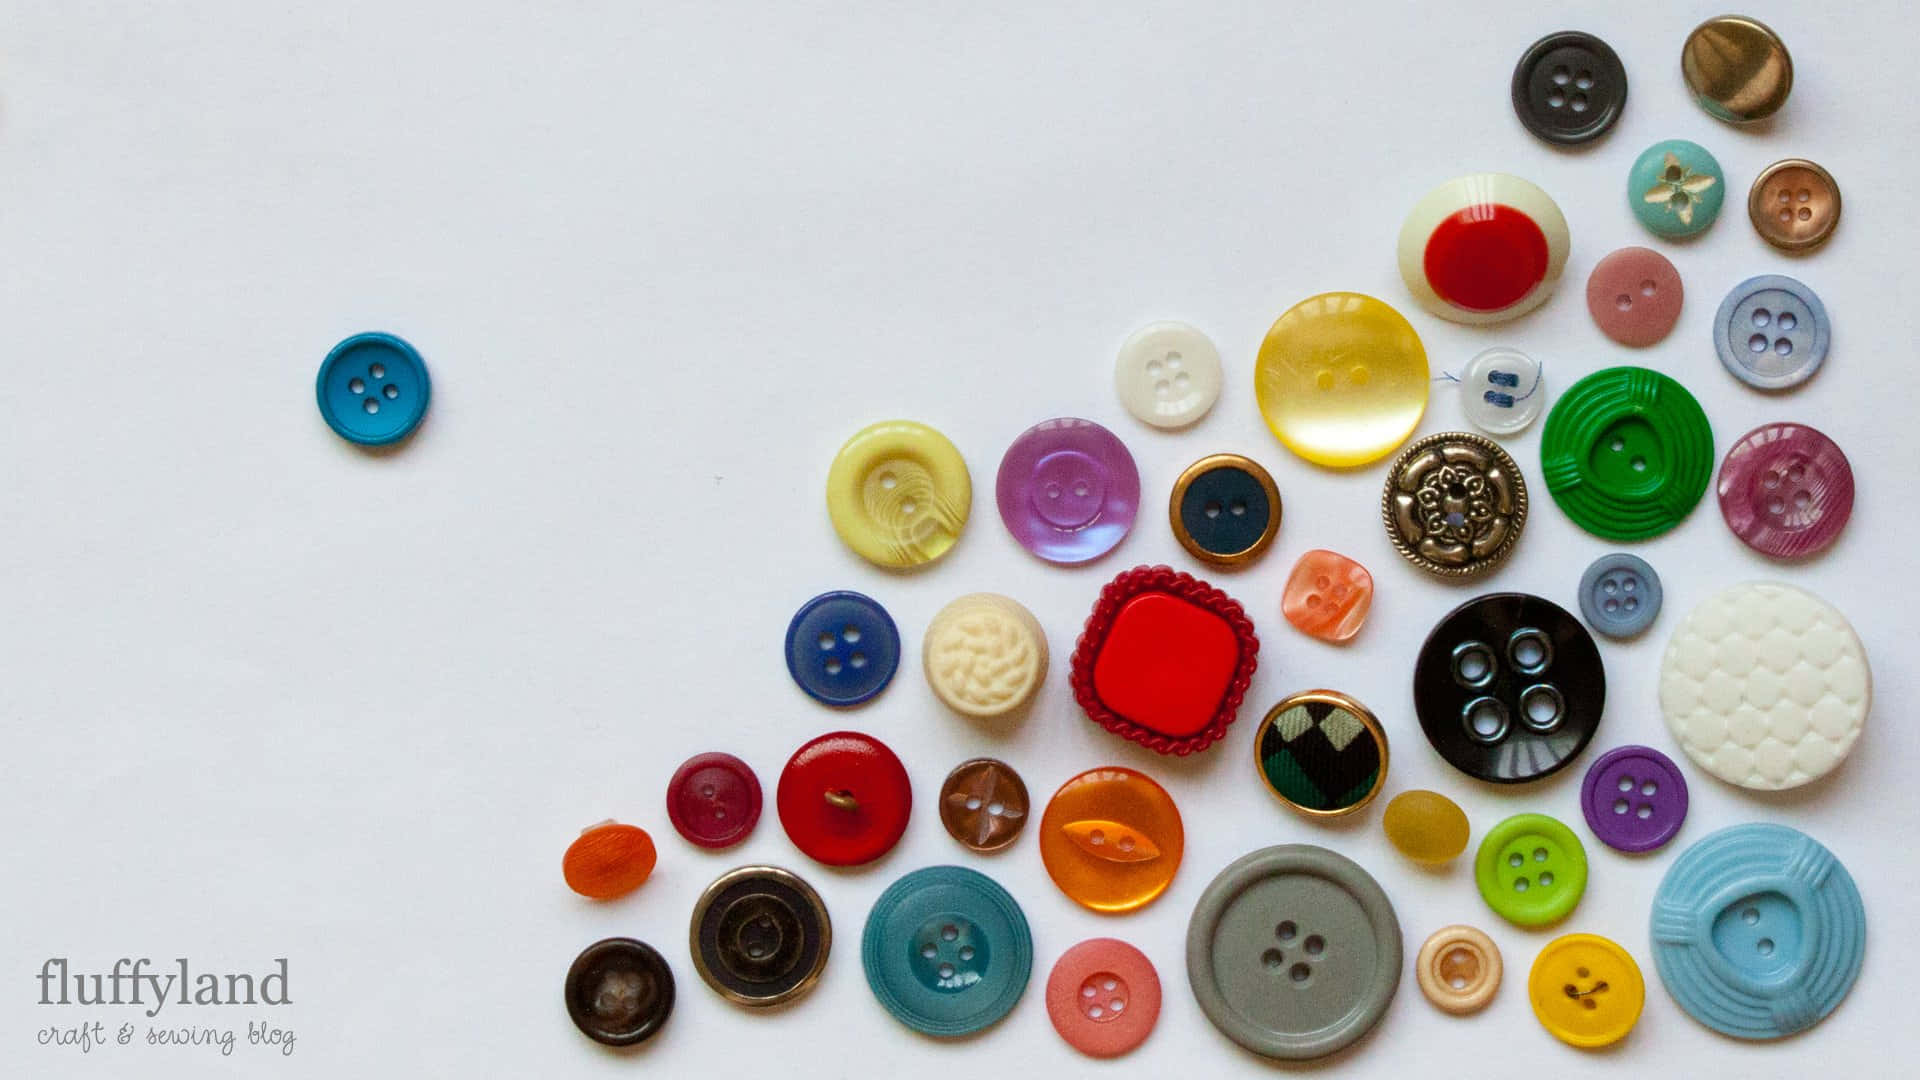 A Group Of Buttons Arranged In A Circle